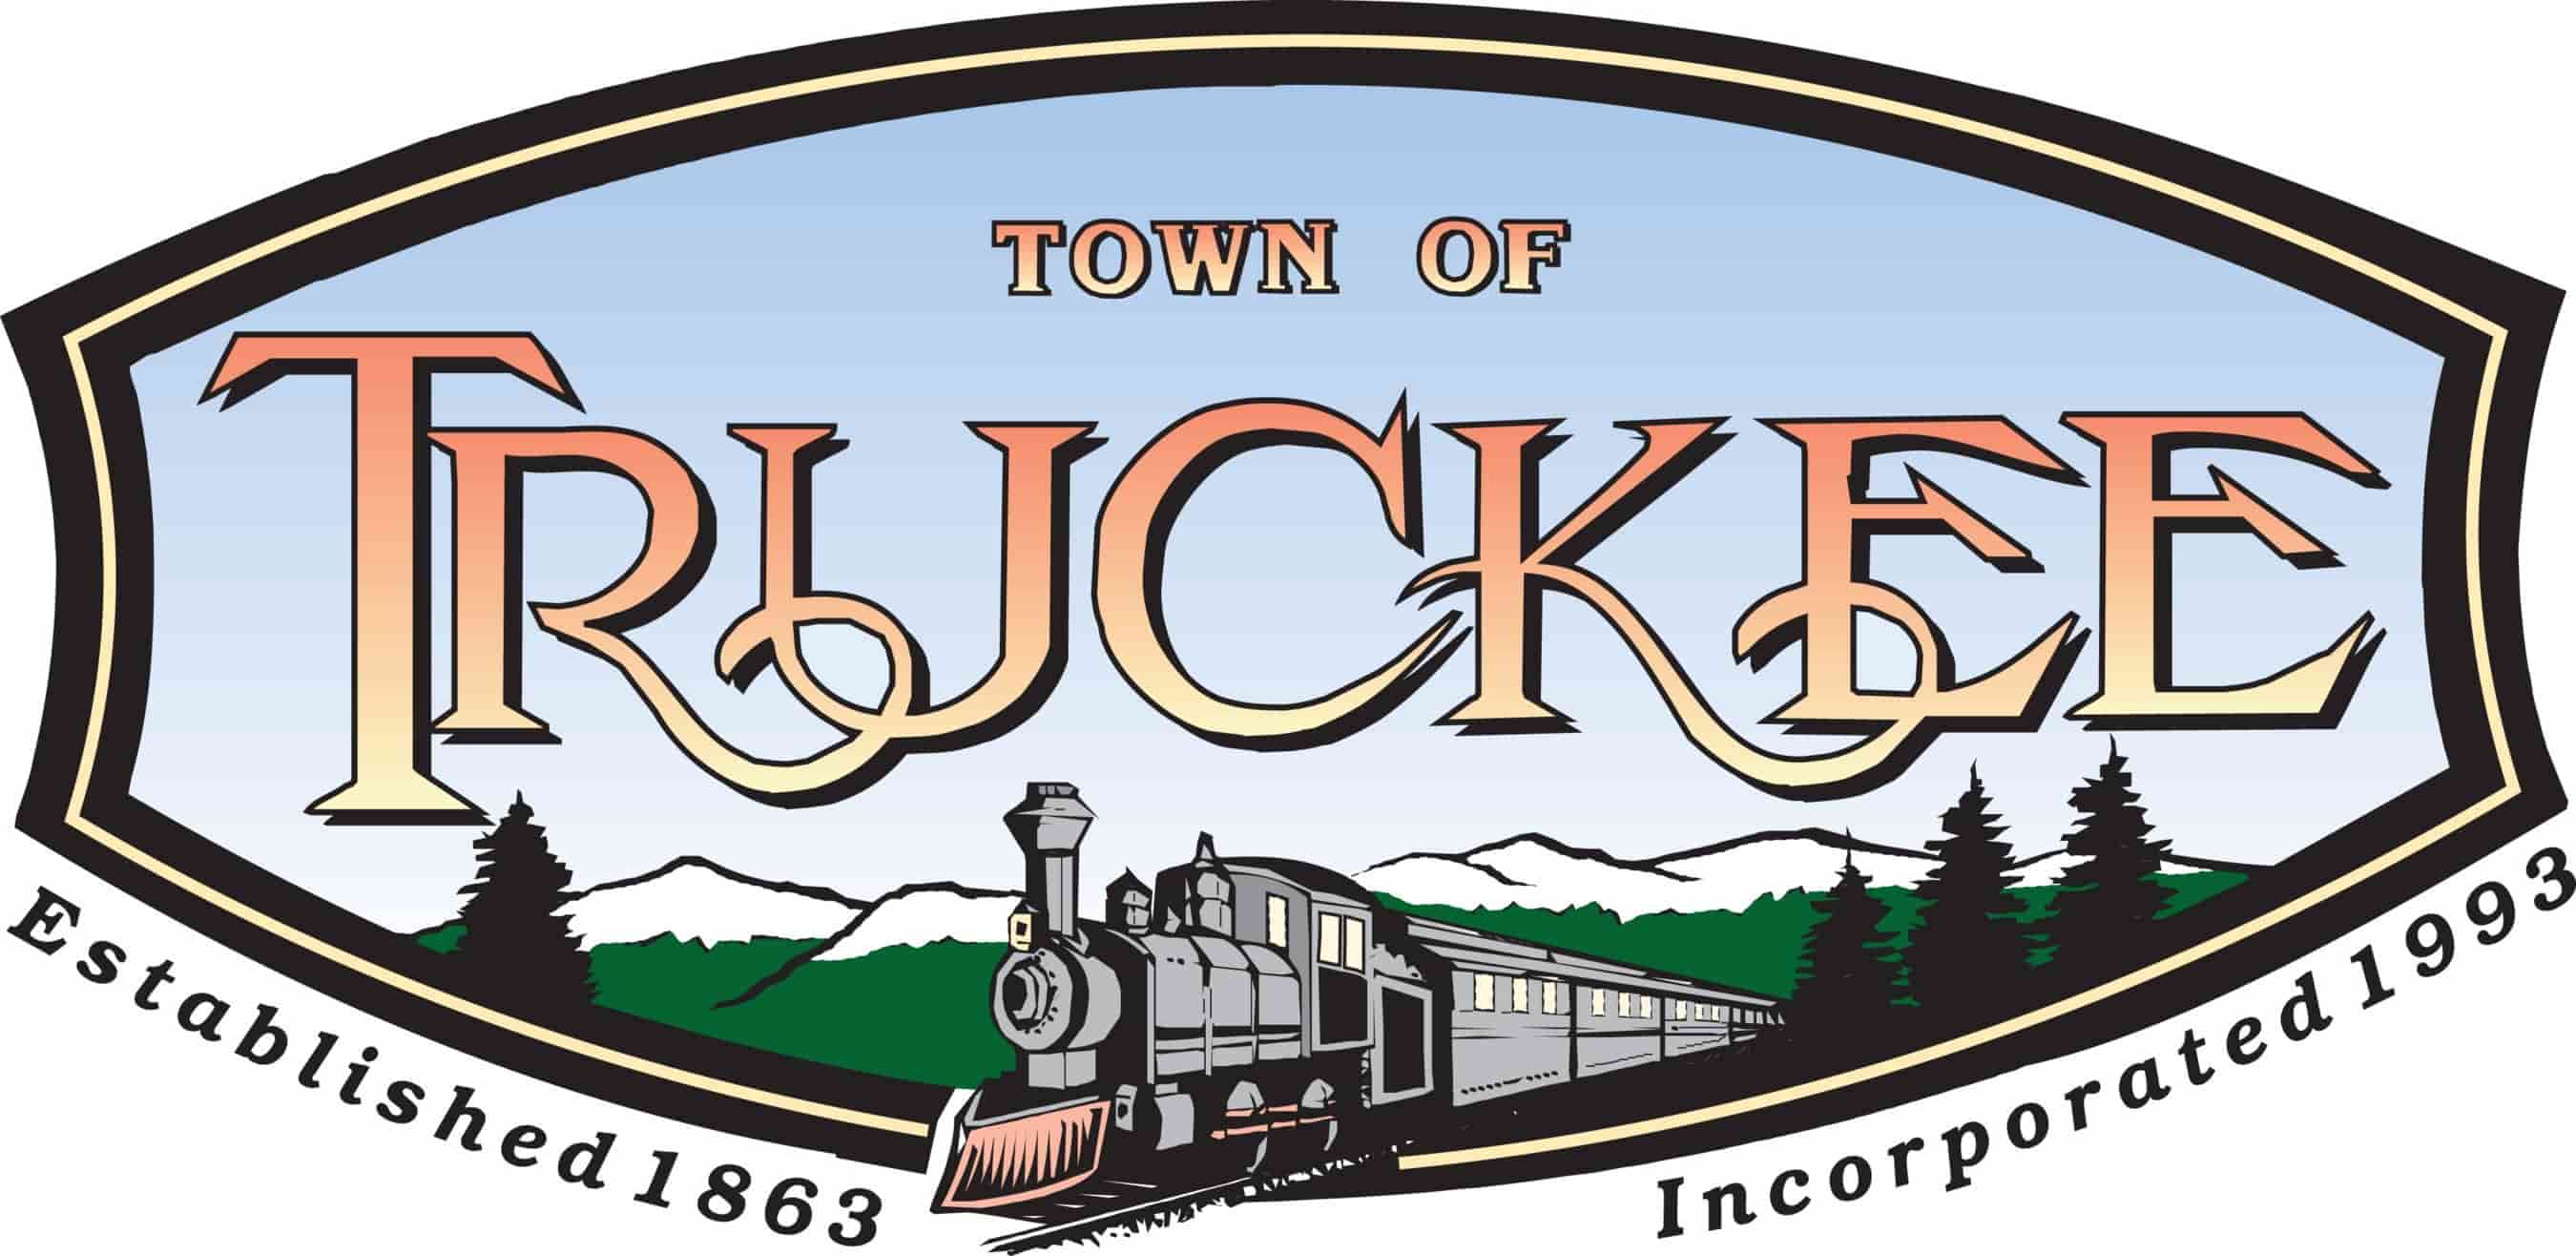 In Partnership with nZero, Town of Truckee Launches Public Portal to Track Carbon Emissions 24/7